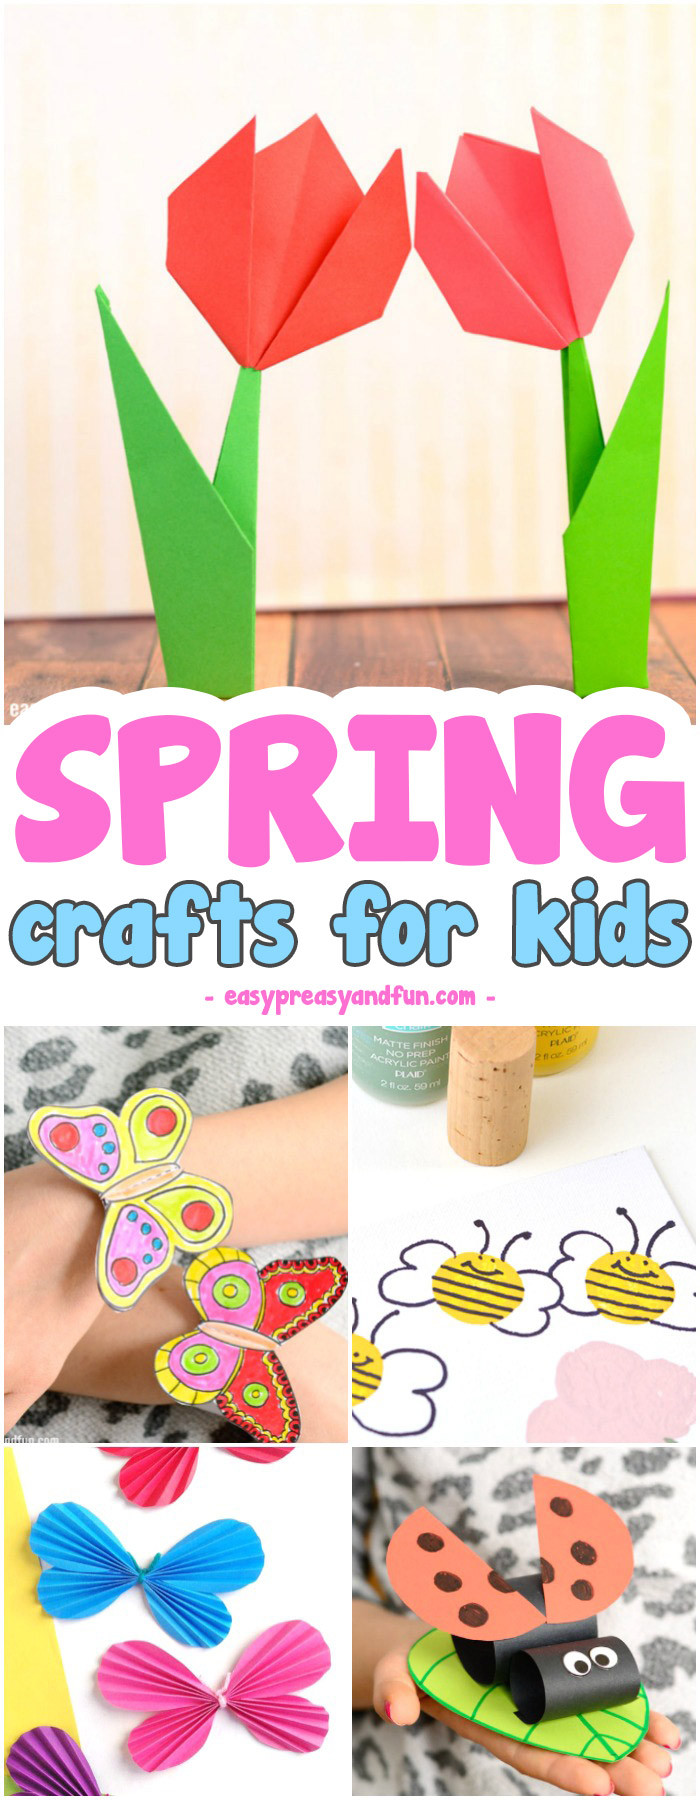 Fun Kids Crafts
 Spring Crafts for Kids Art and Craft Project Ideas for